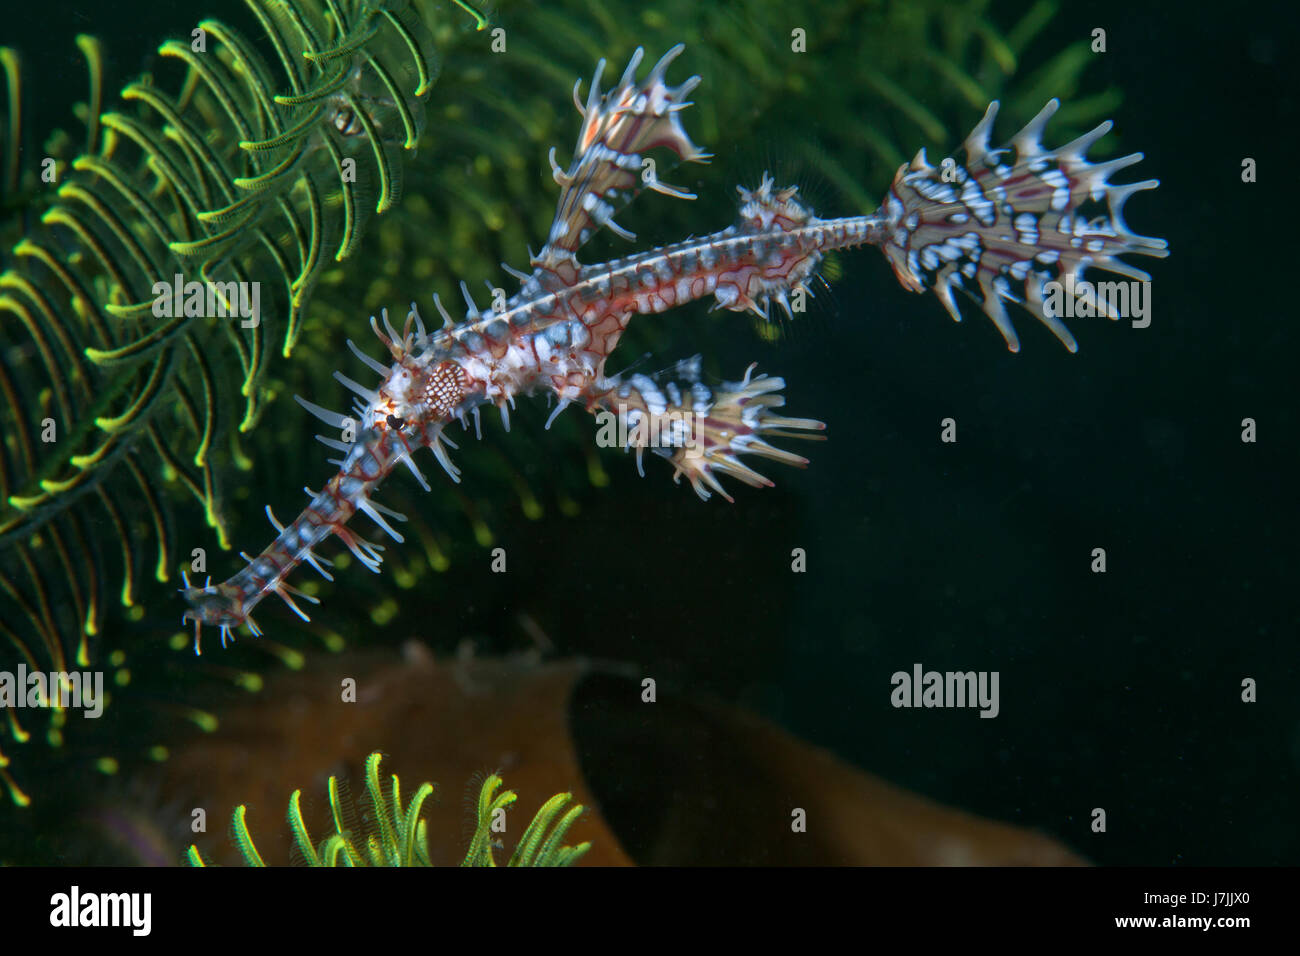 Ornate Ghost Pipefish hovering among green crinoids. Lembeh Straits, Indonesia. Stock Photo